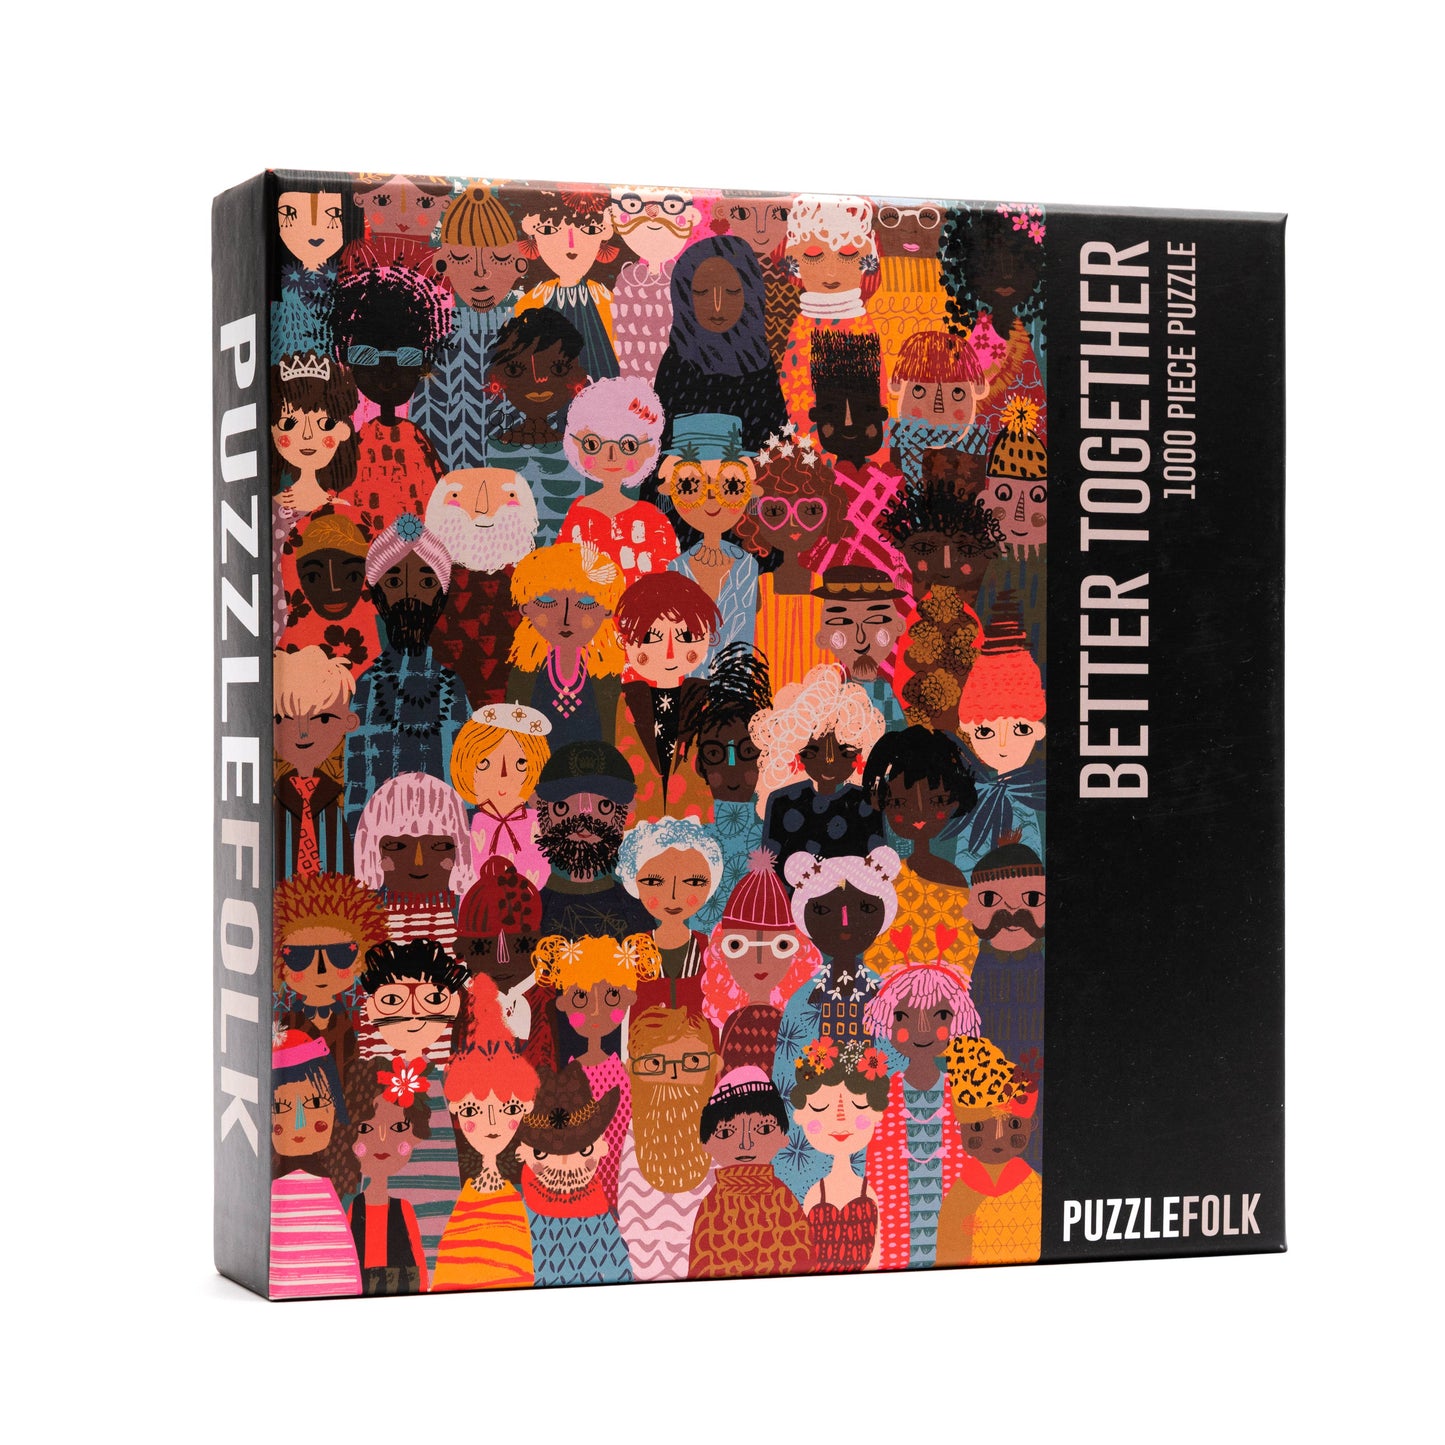 Better Together 1,000 Piece Puzzle